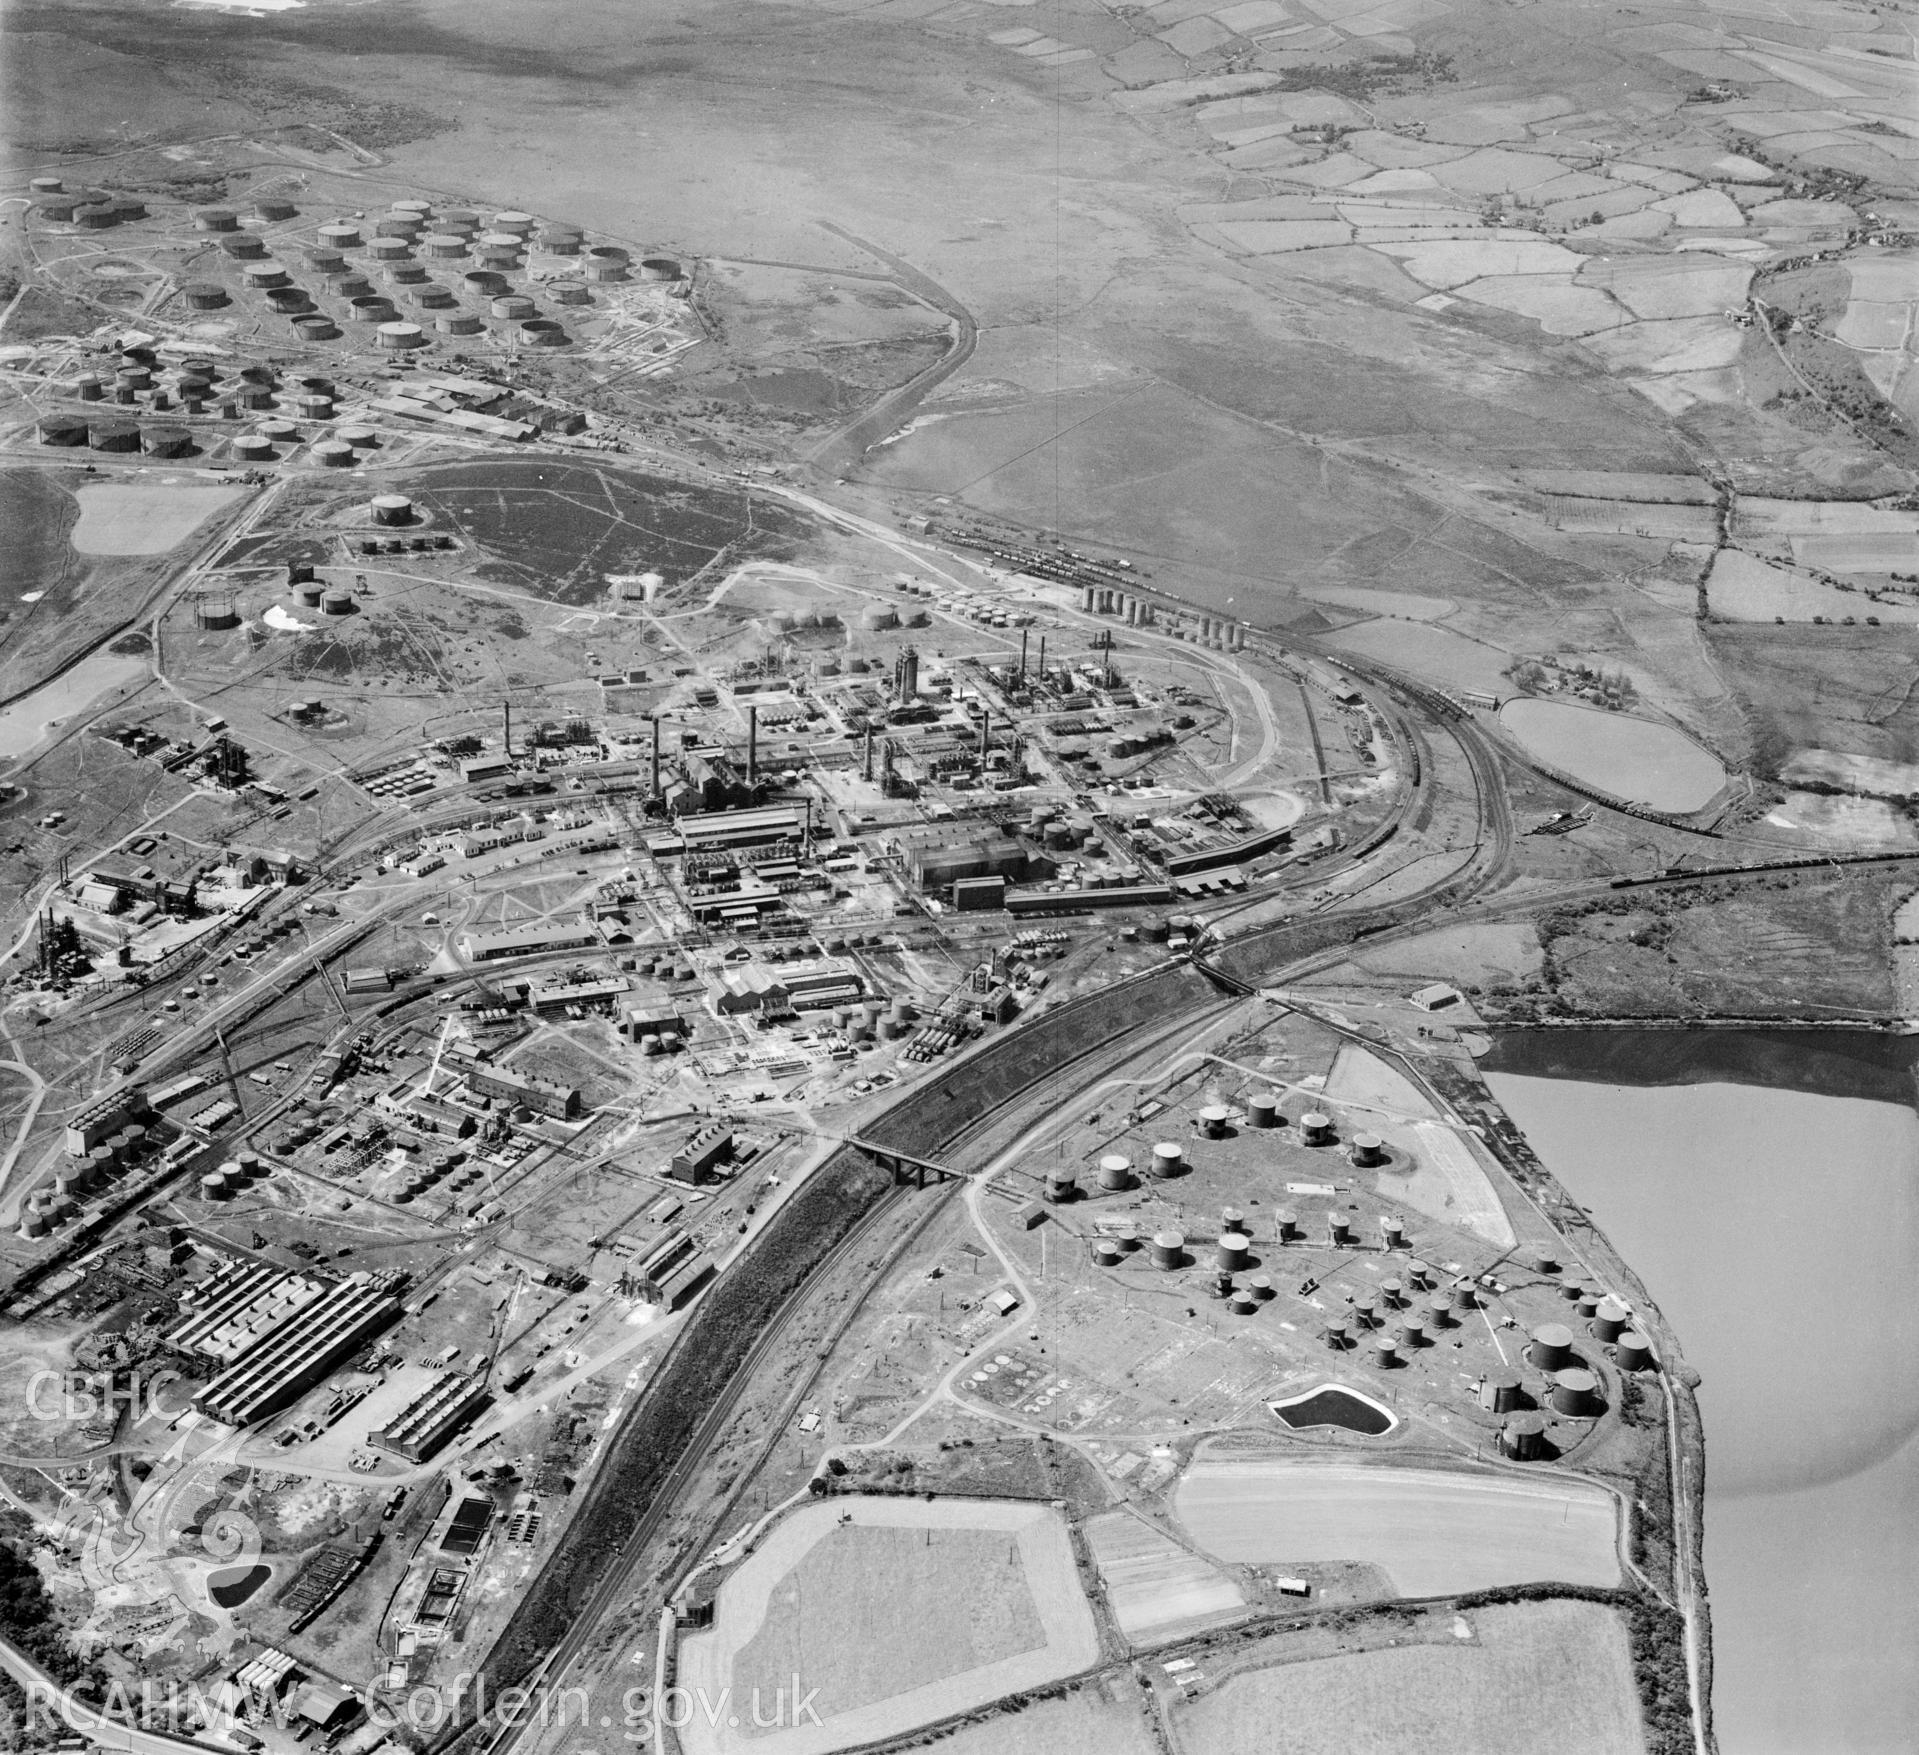 General view of the Anglo Iranian oil refinery, Llandarcy. Oblique aerial photograph, 5?" cut roll film.